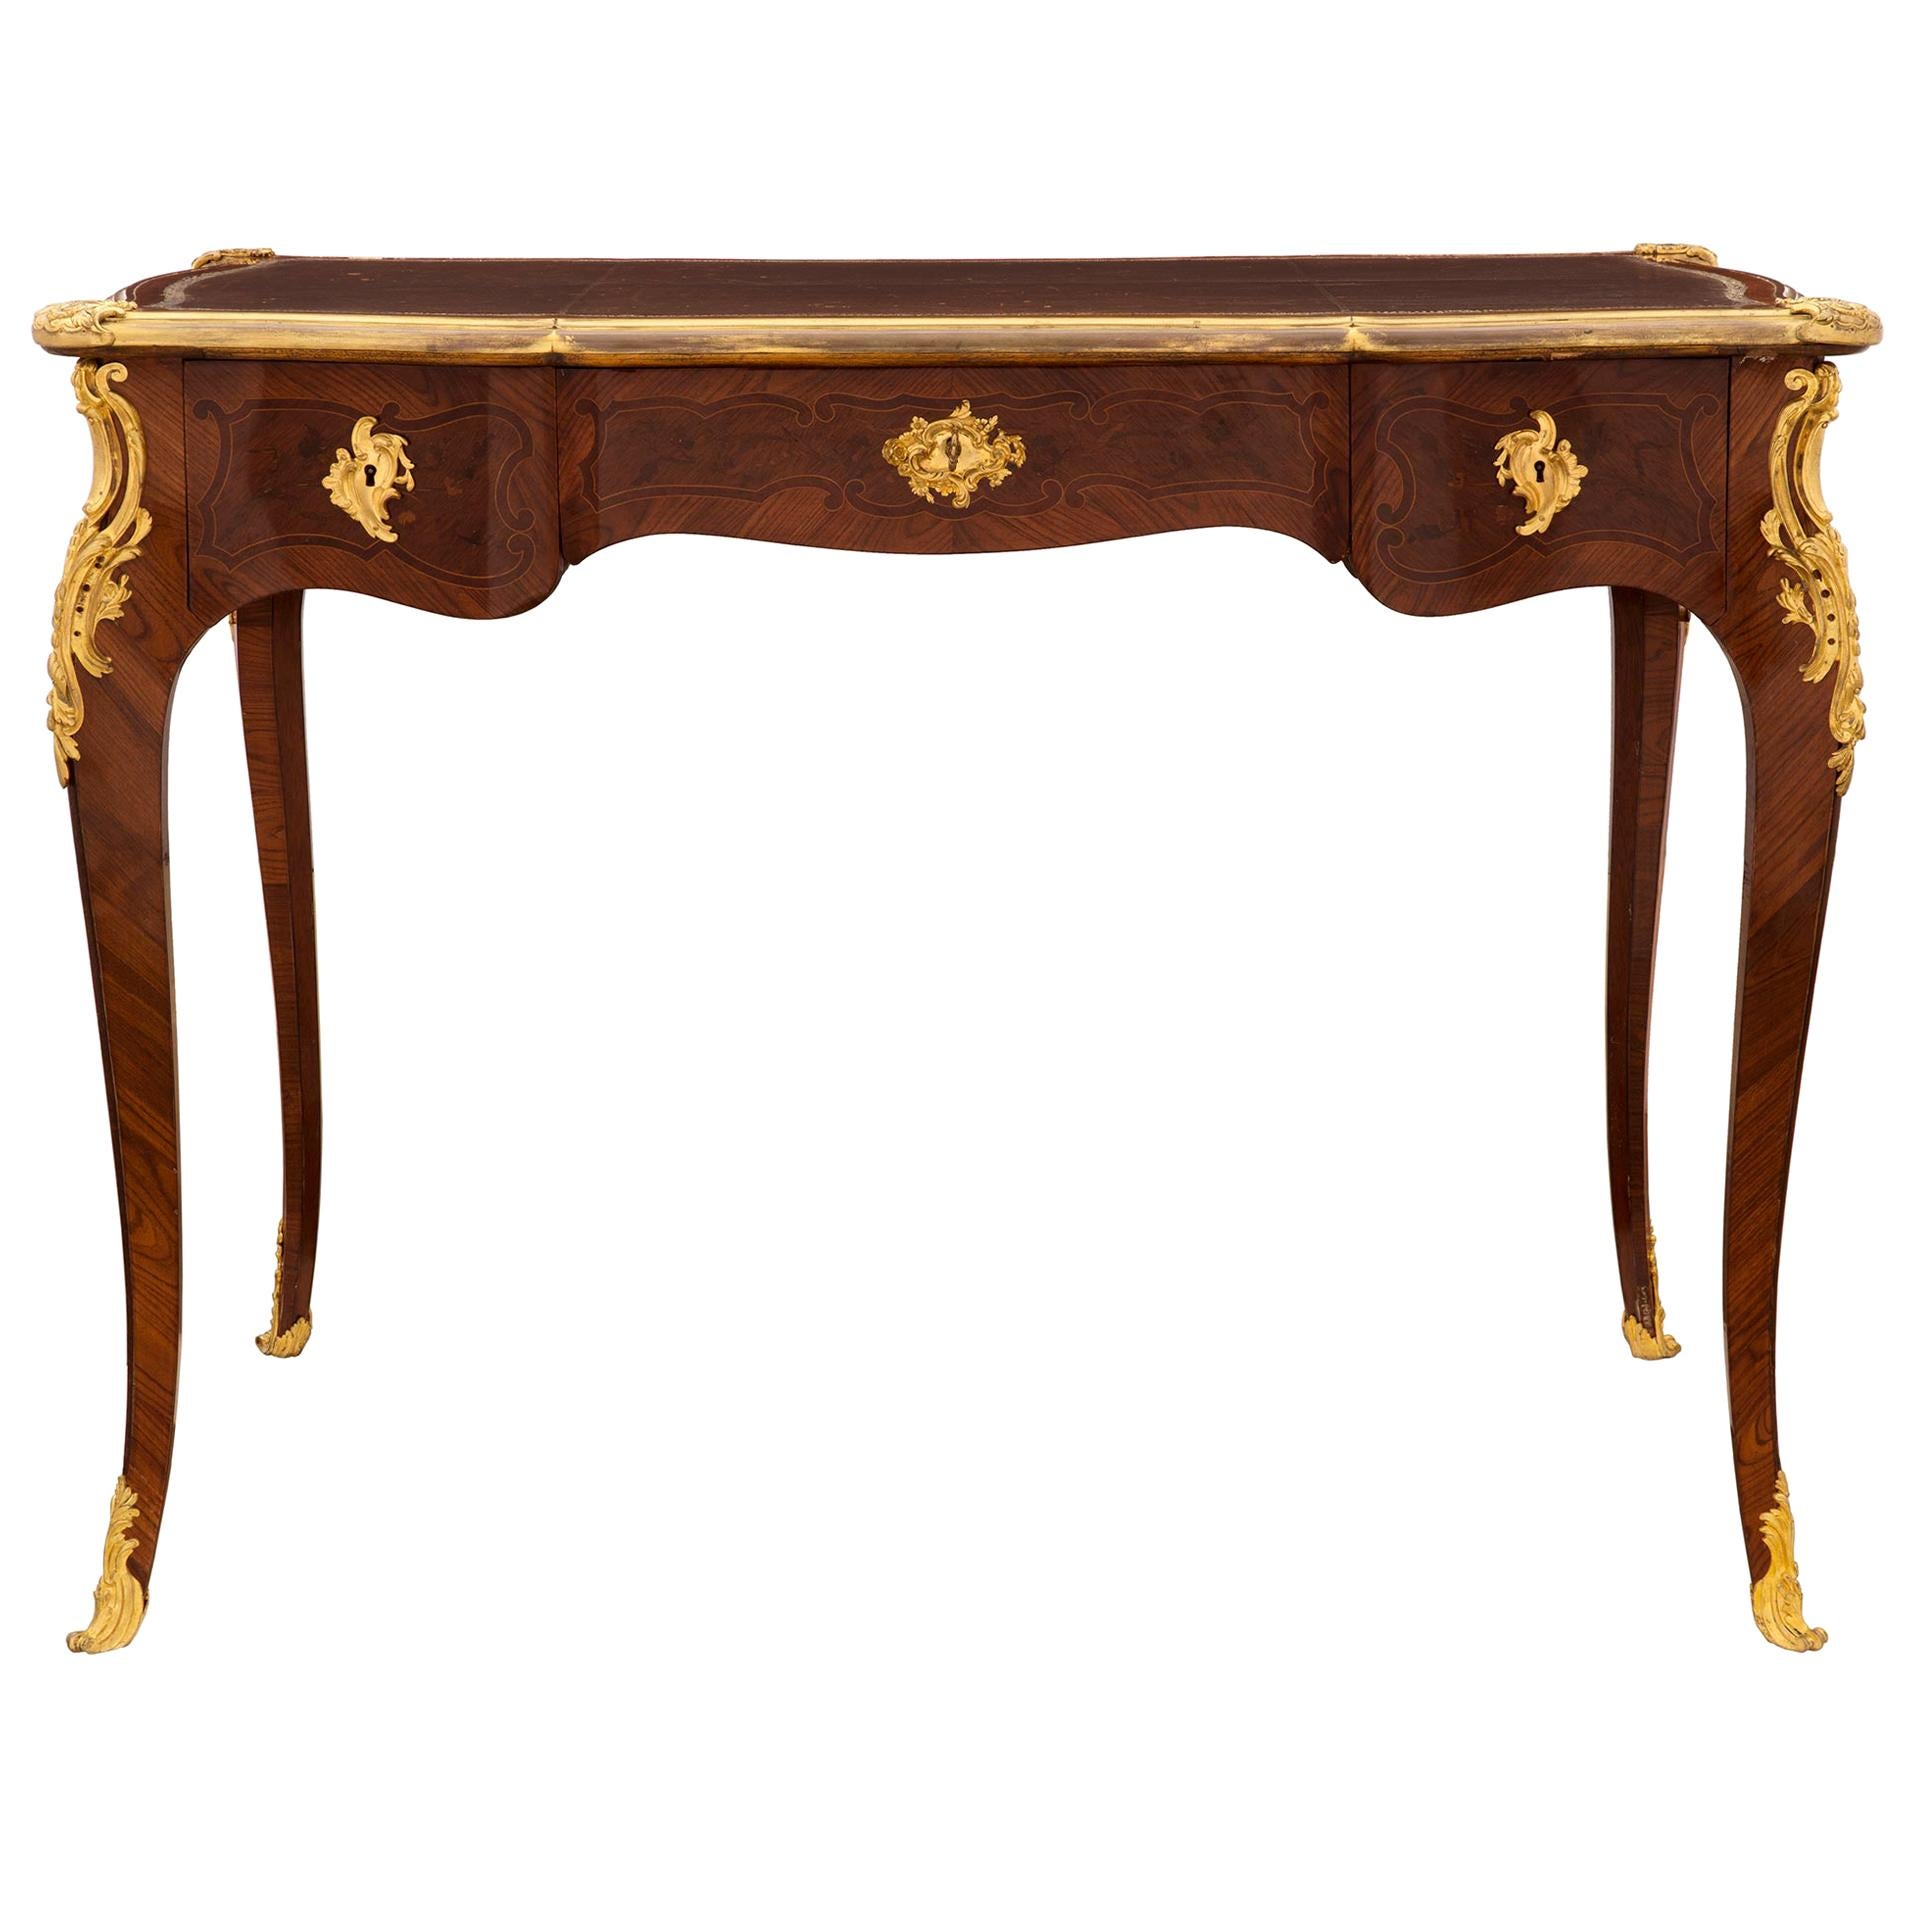 French 19th Century Louis XV Style Kingwood, Tulipwood, Ormolu and Leather Desk